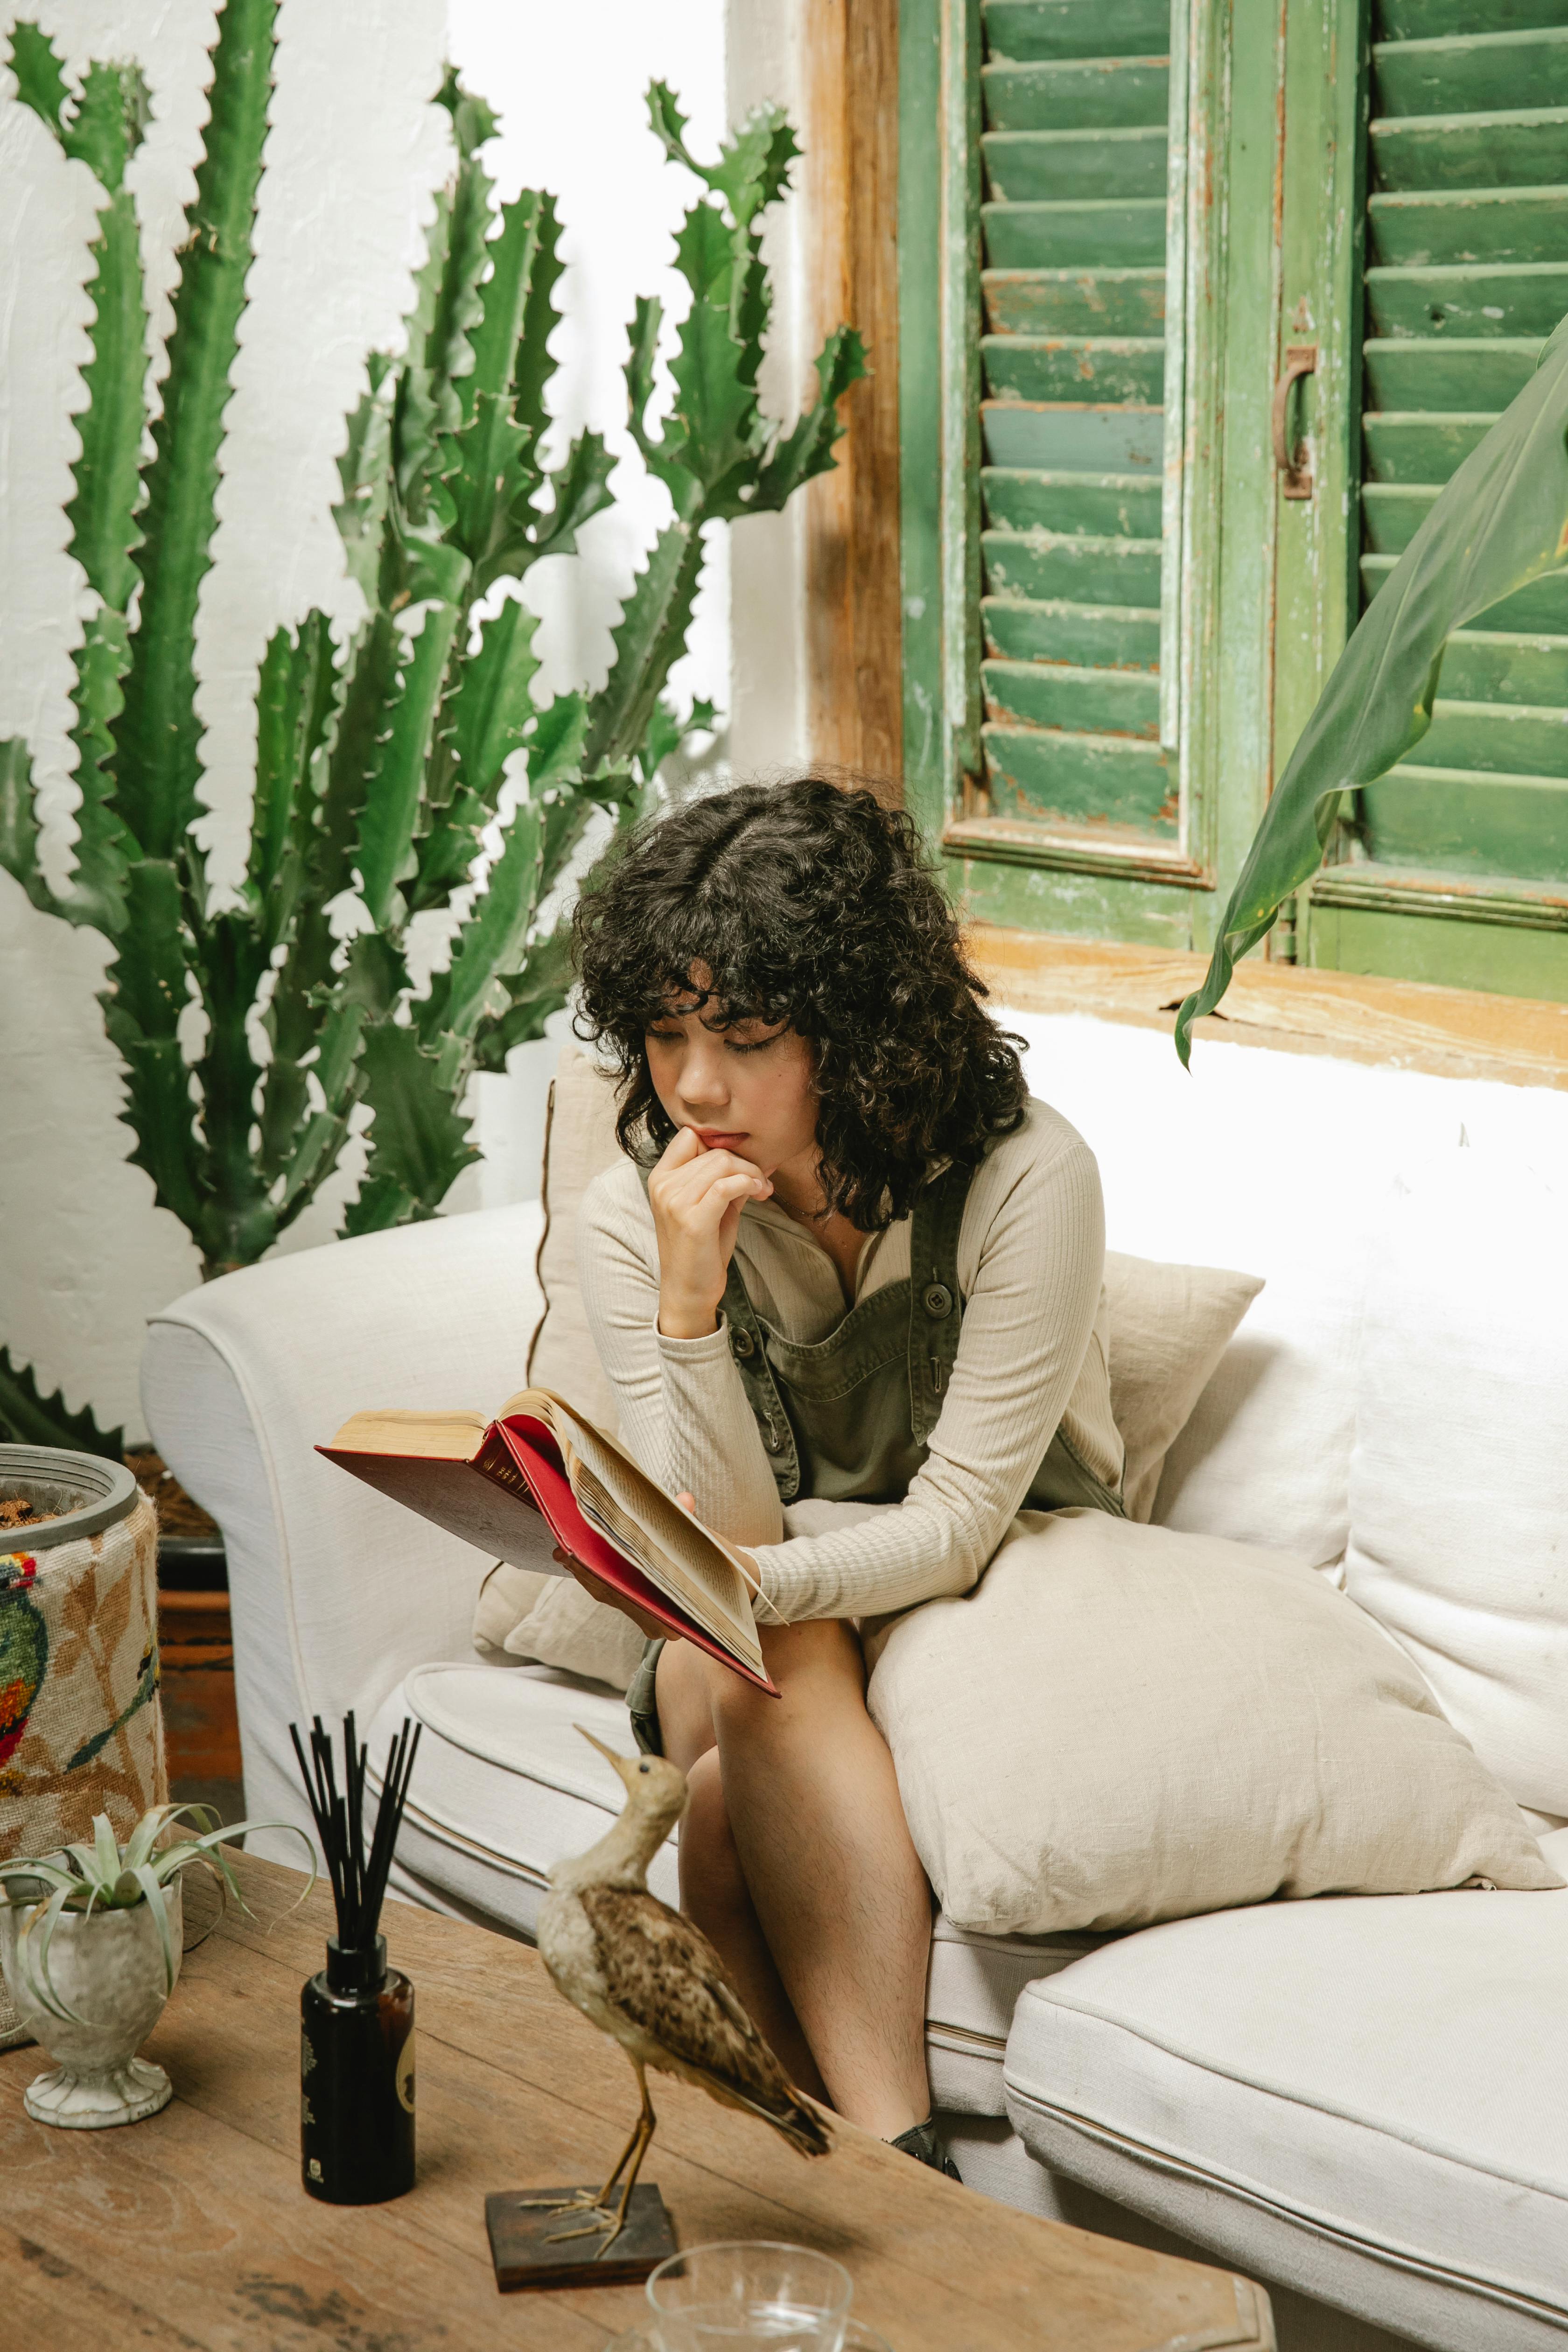 concentrated female reading book in living room with plants